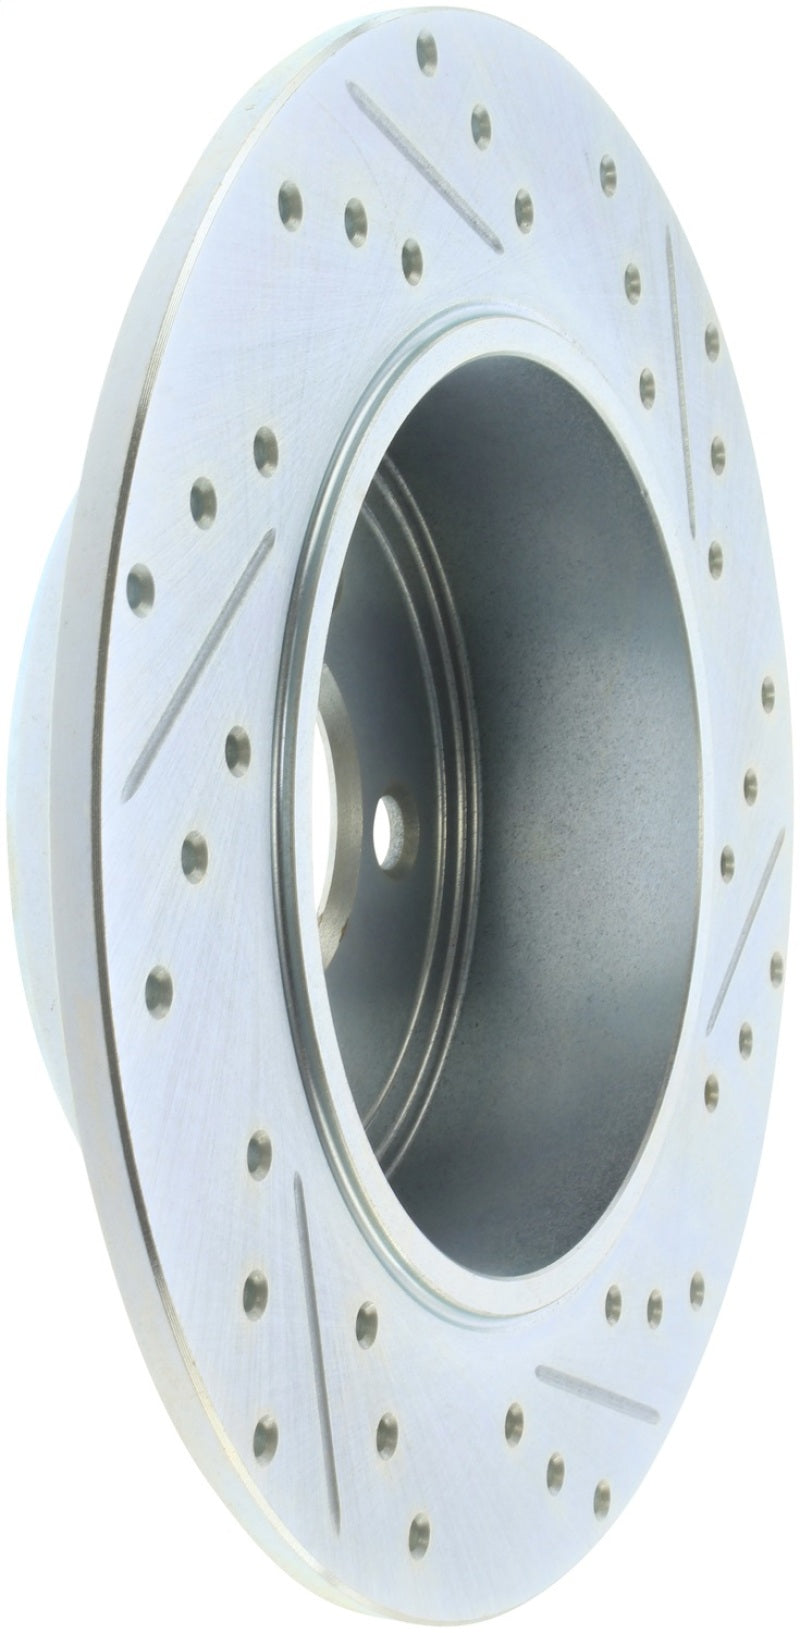 StopTech Select Sport 06-15 Dodge Charger/ 05-15 Chrysler 300 Slotted/Drilled Right Rear Brake Rotor